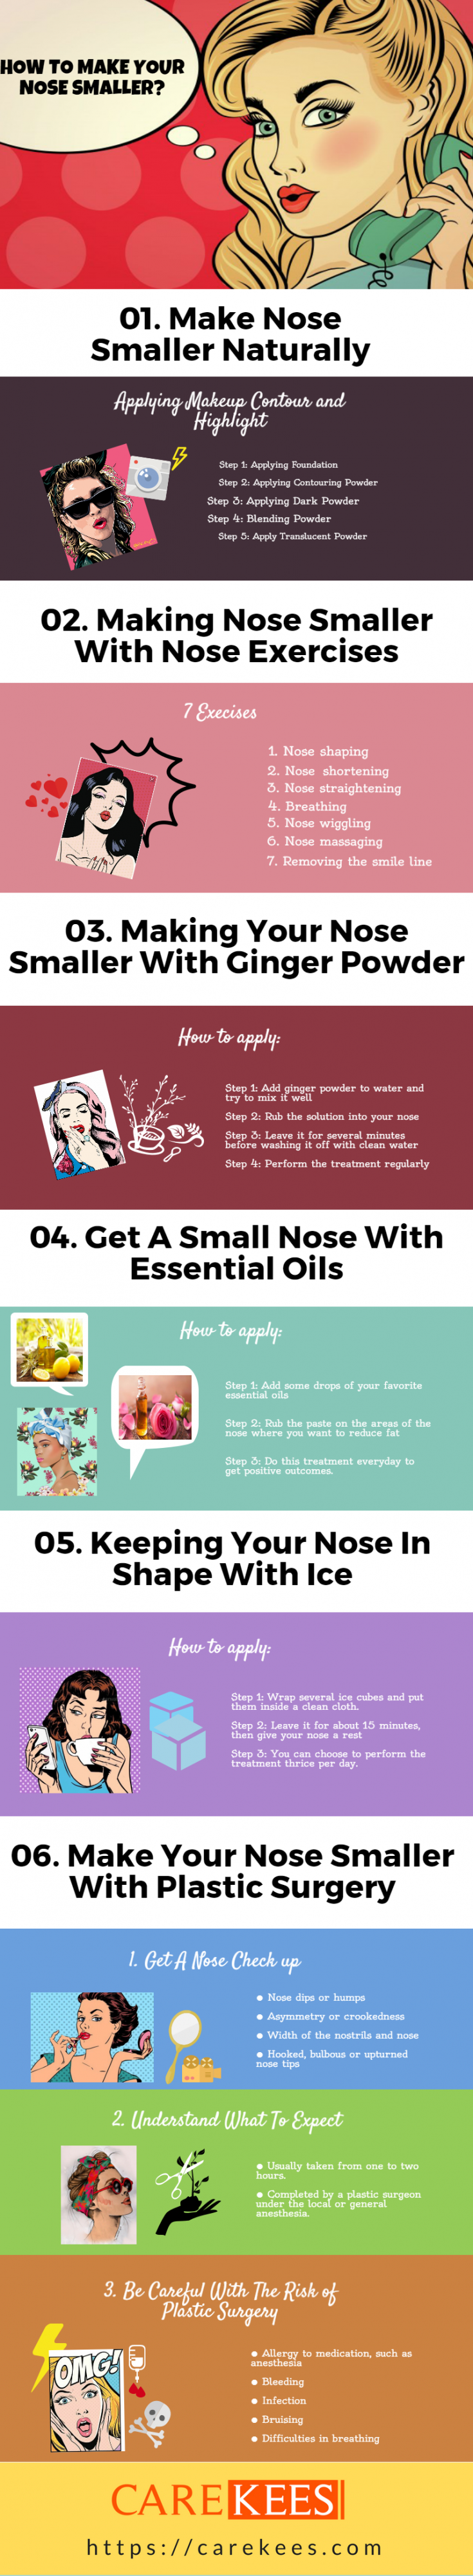 how to make your nose smaller 2